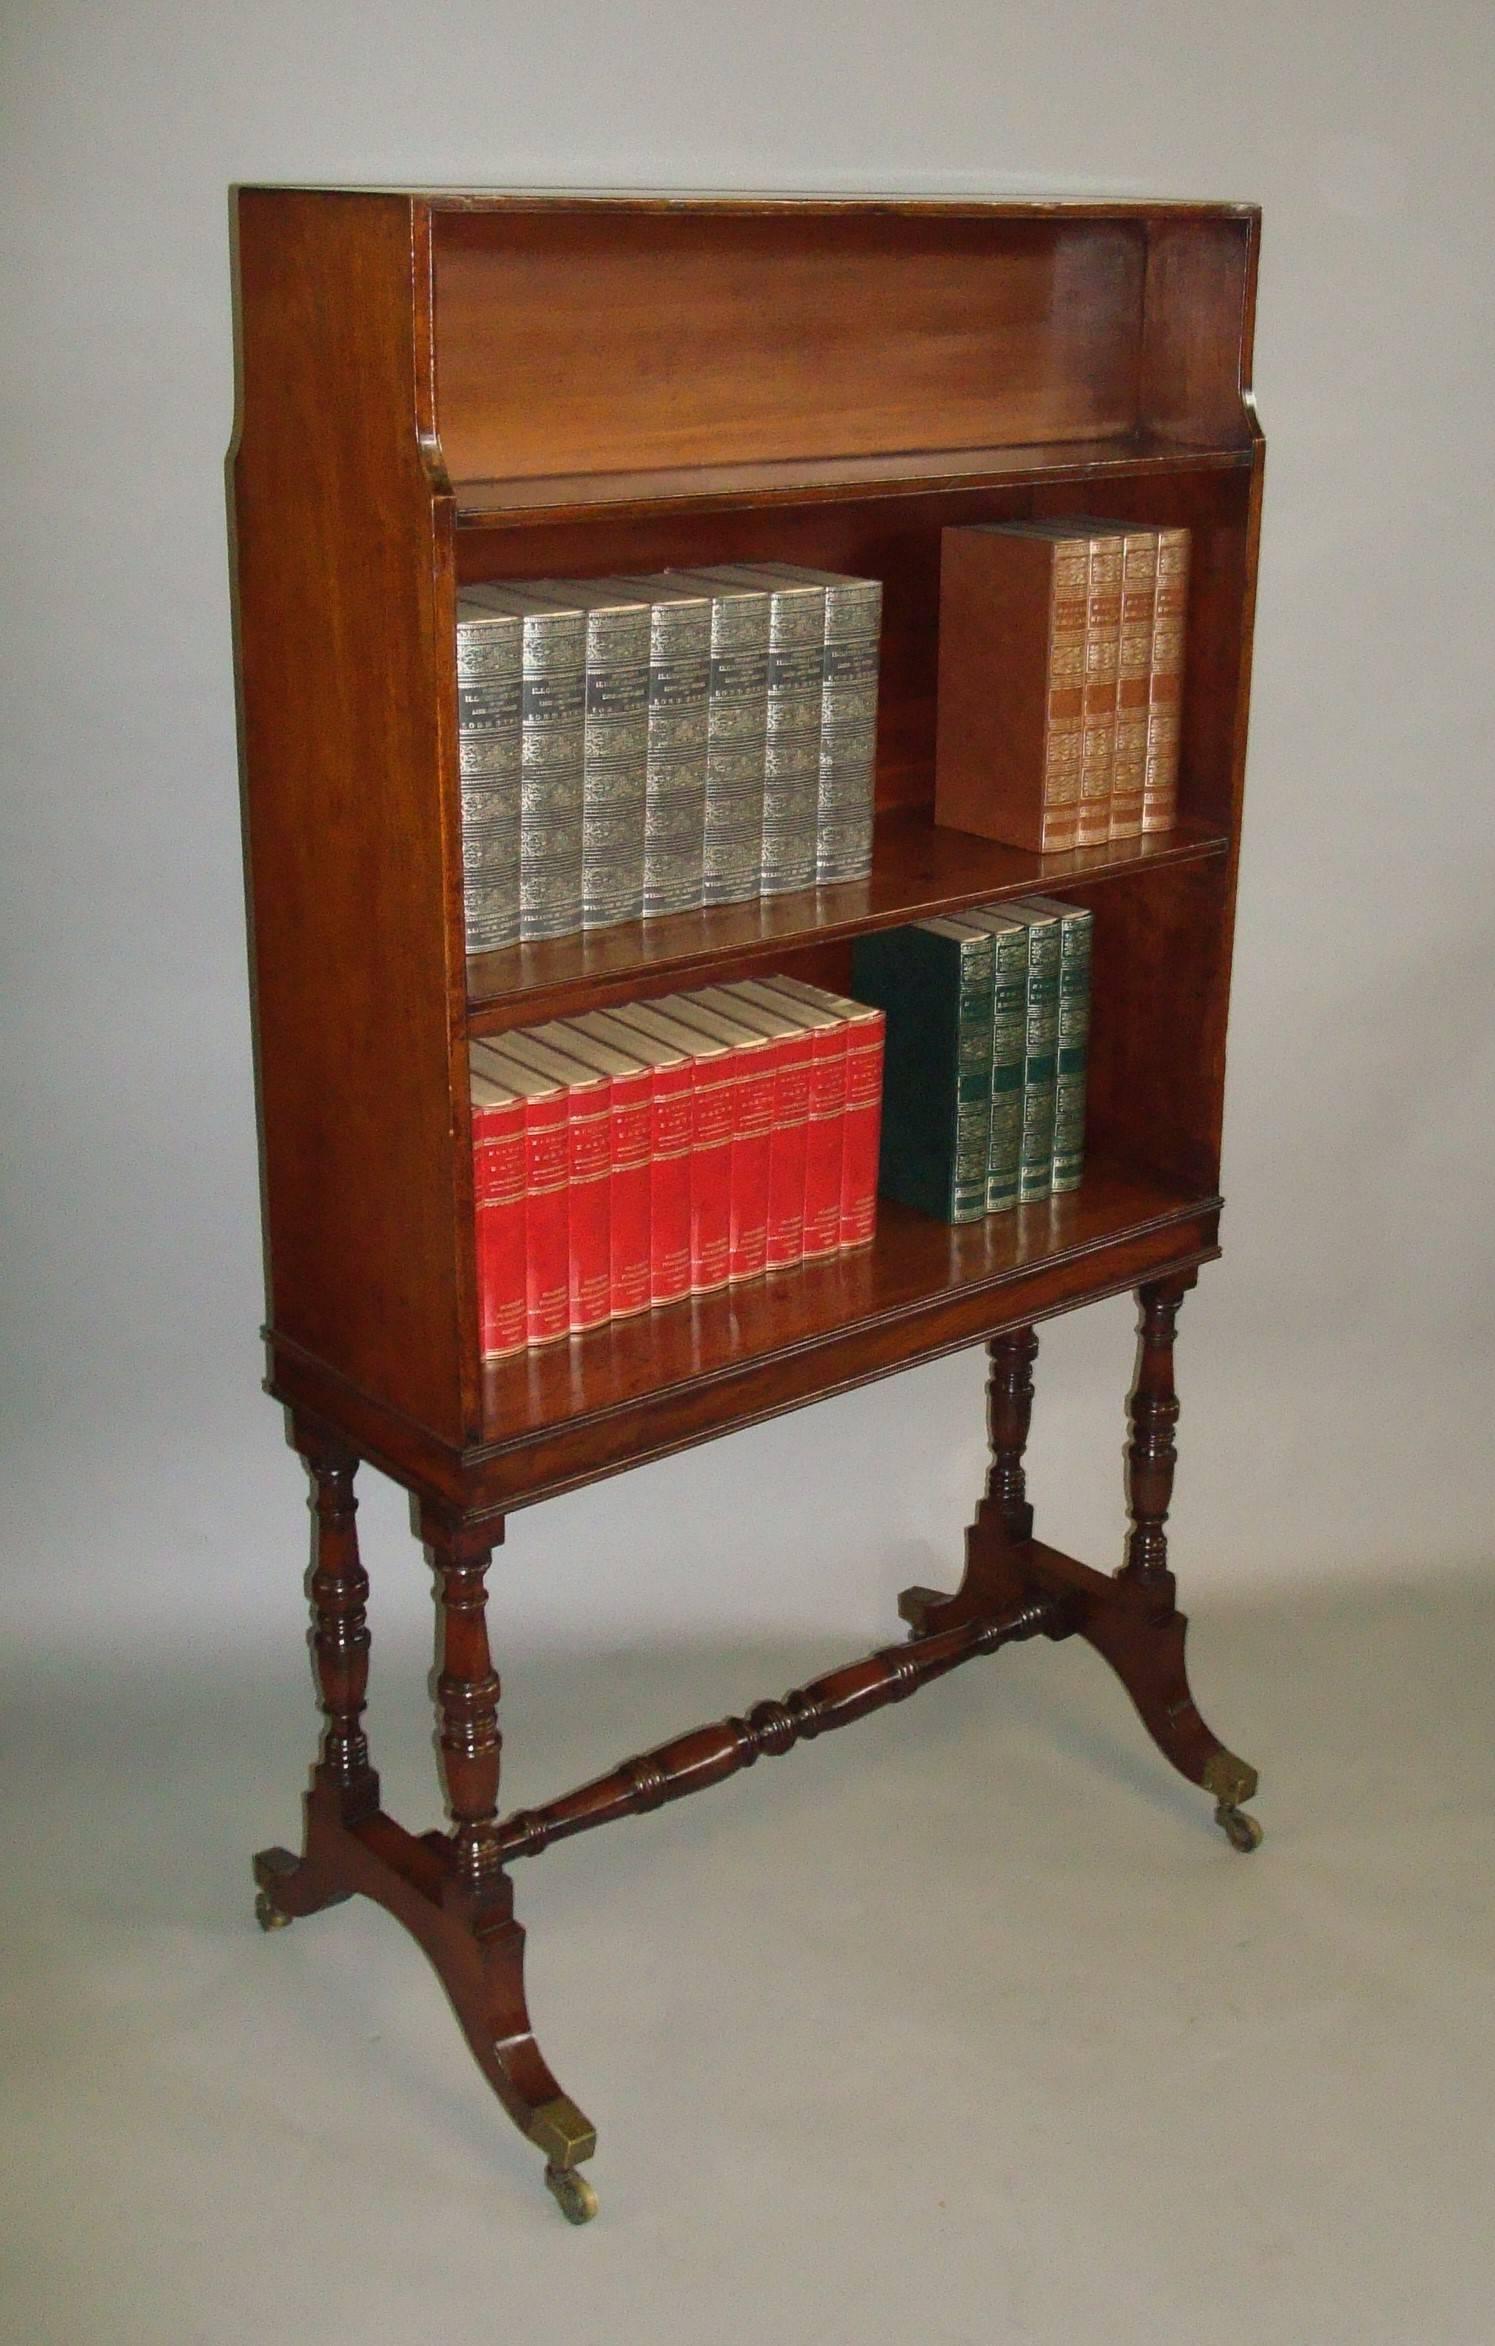 Good Regency mahogany waterfall open bookcase of freestanding form; the front of the bookcase with fixed tiered shelves and reeded edges, the reverse with a small open shelf and paneled back below. Raised on a figured mahogany shallow frieze with